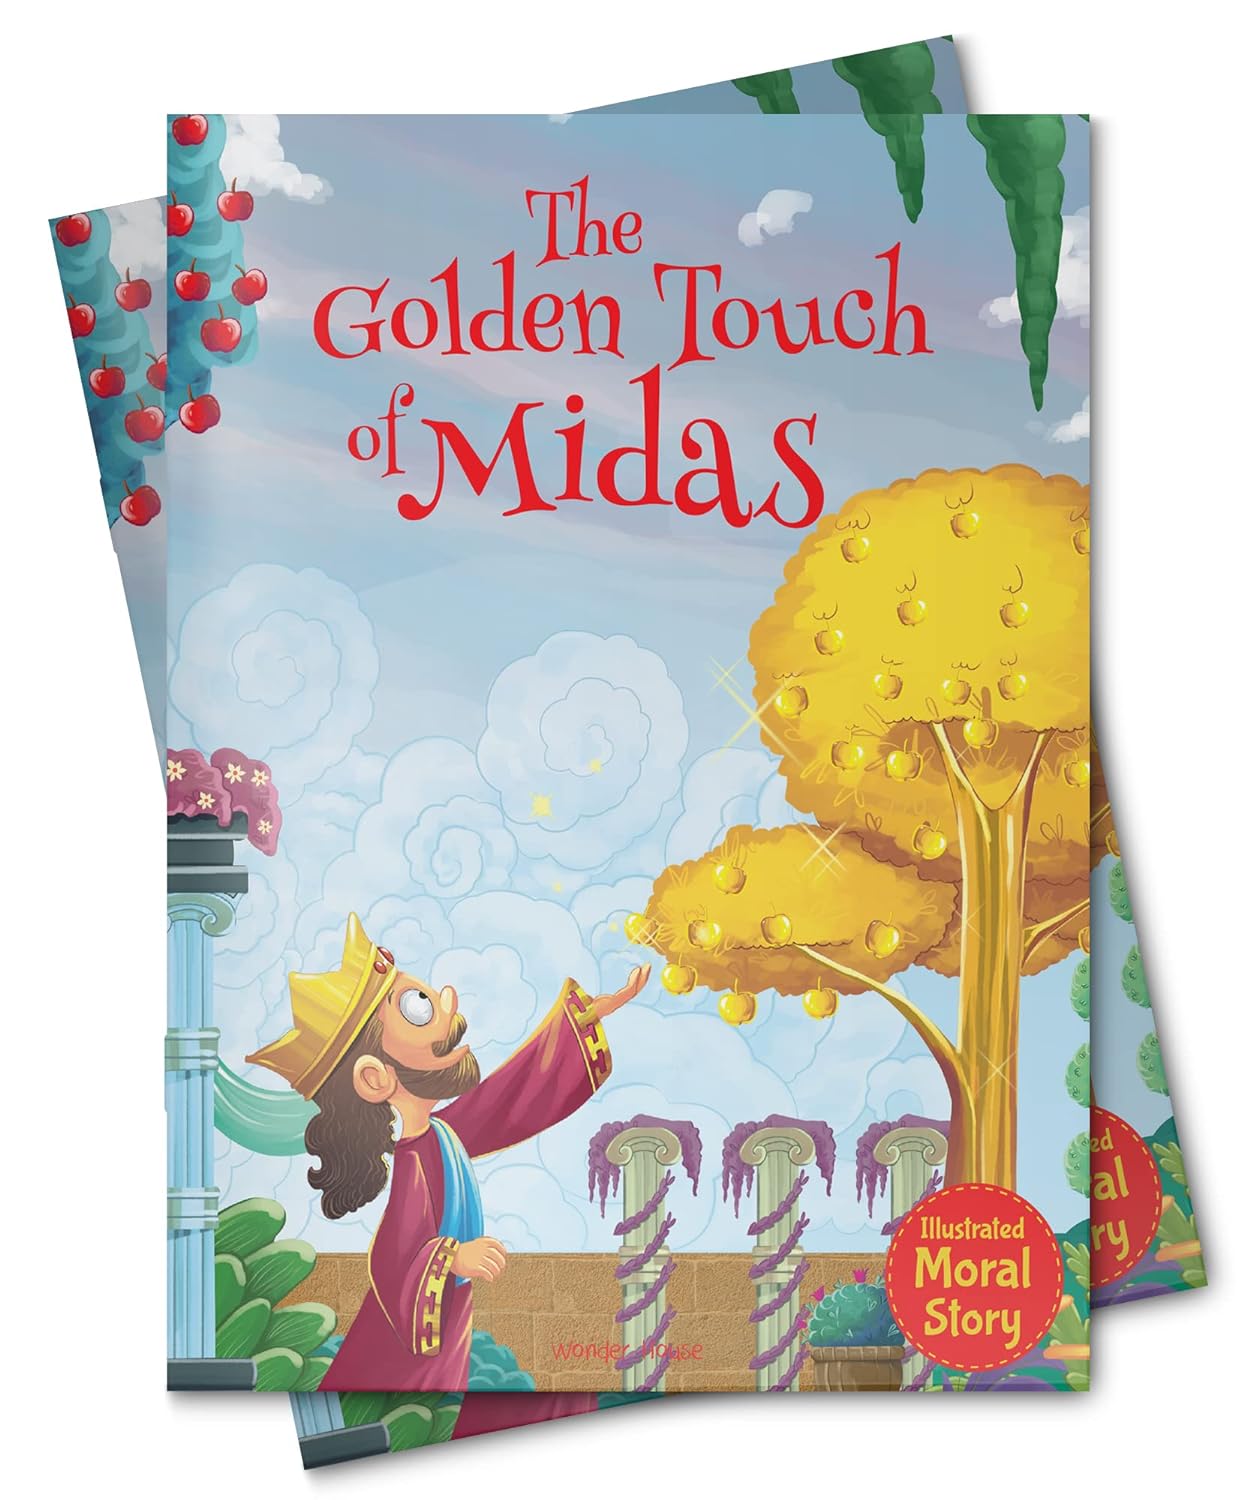 The Golden Touch of Midas - Illustrated Moral Story for Children